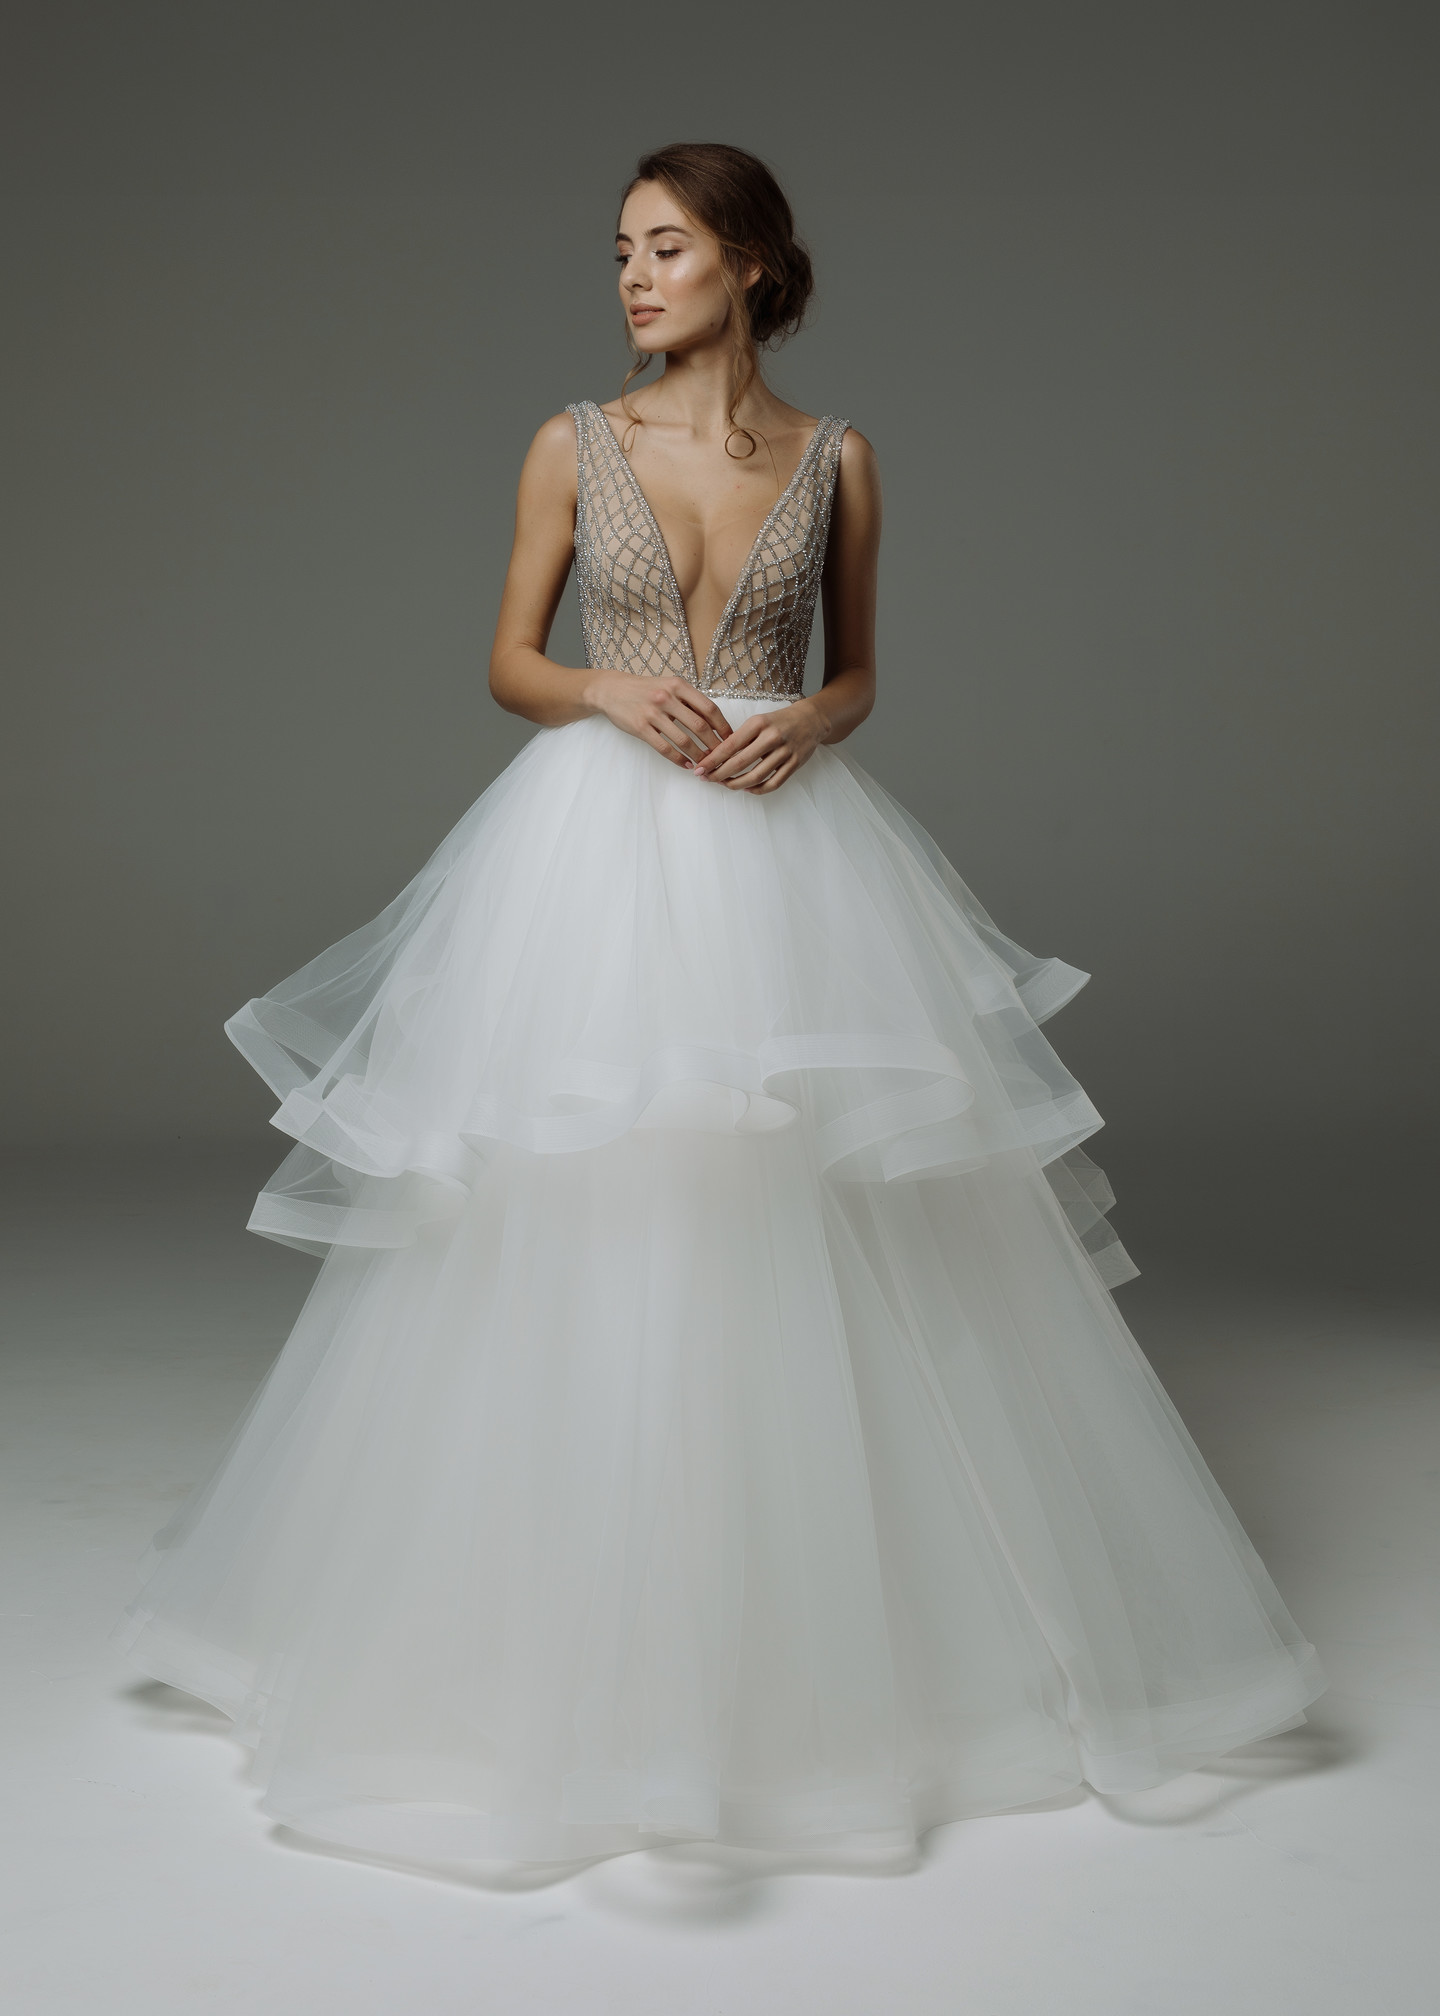 Marian gown, 2019, couture, dress, bridal, off-white, tulle, embroidery, train, A-line